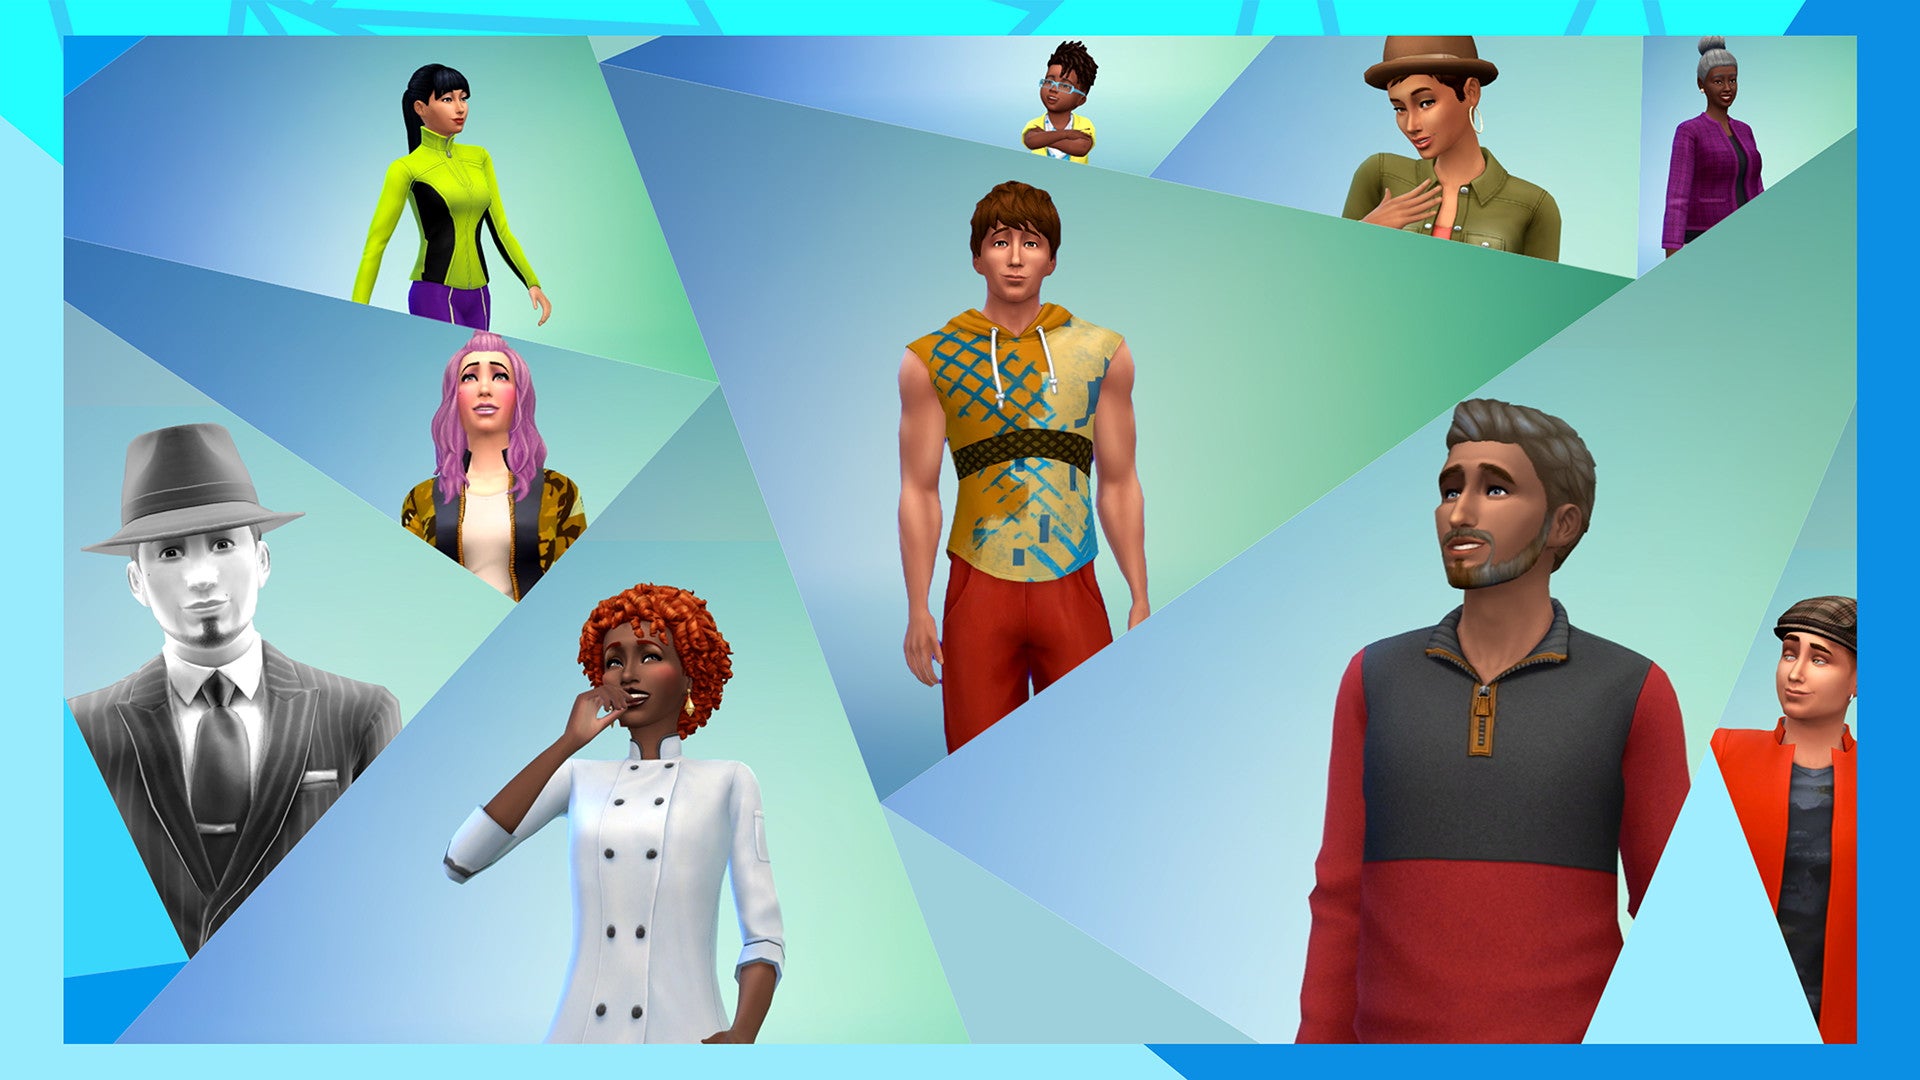 An abstract cover image for The Sims 4 shows a variety of Sims in portrait (ranging in age from Toddlers to literal ghosts) against an on-brand blue-green background composed of jagged plumbob-like frames.